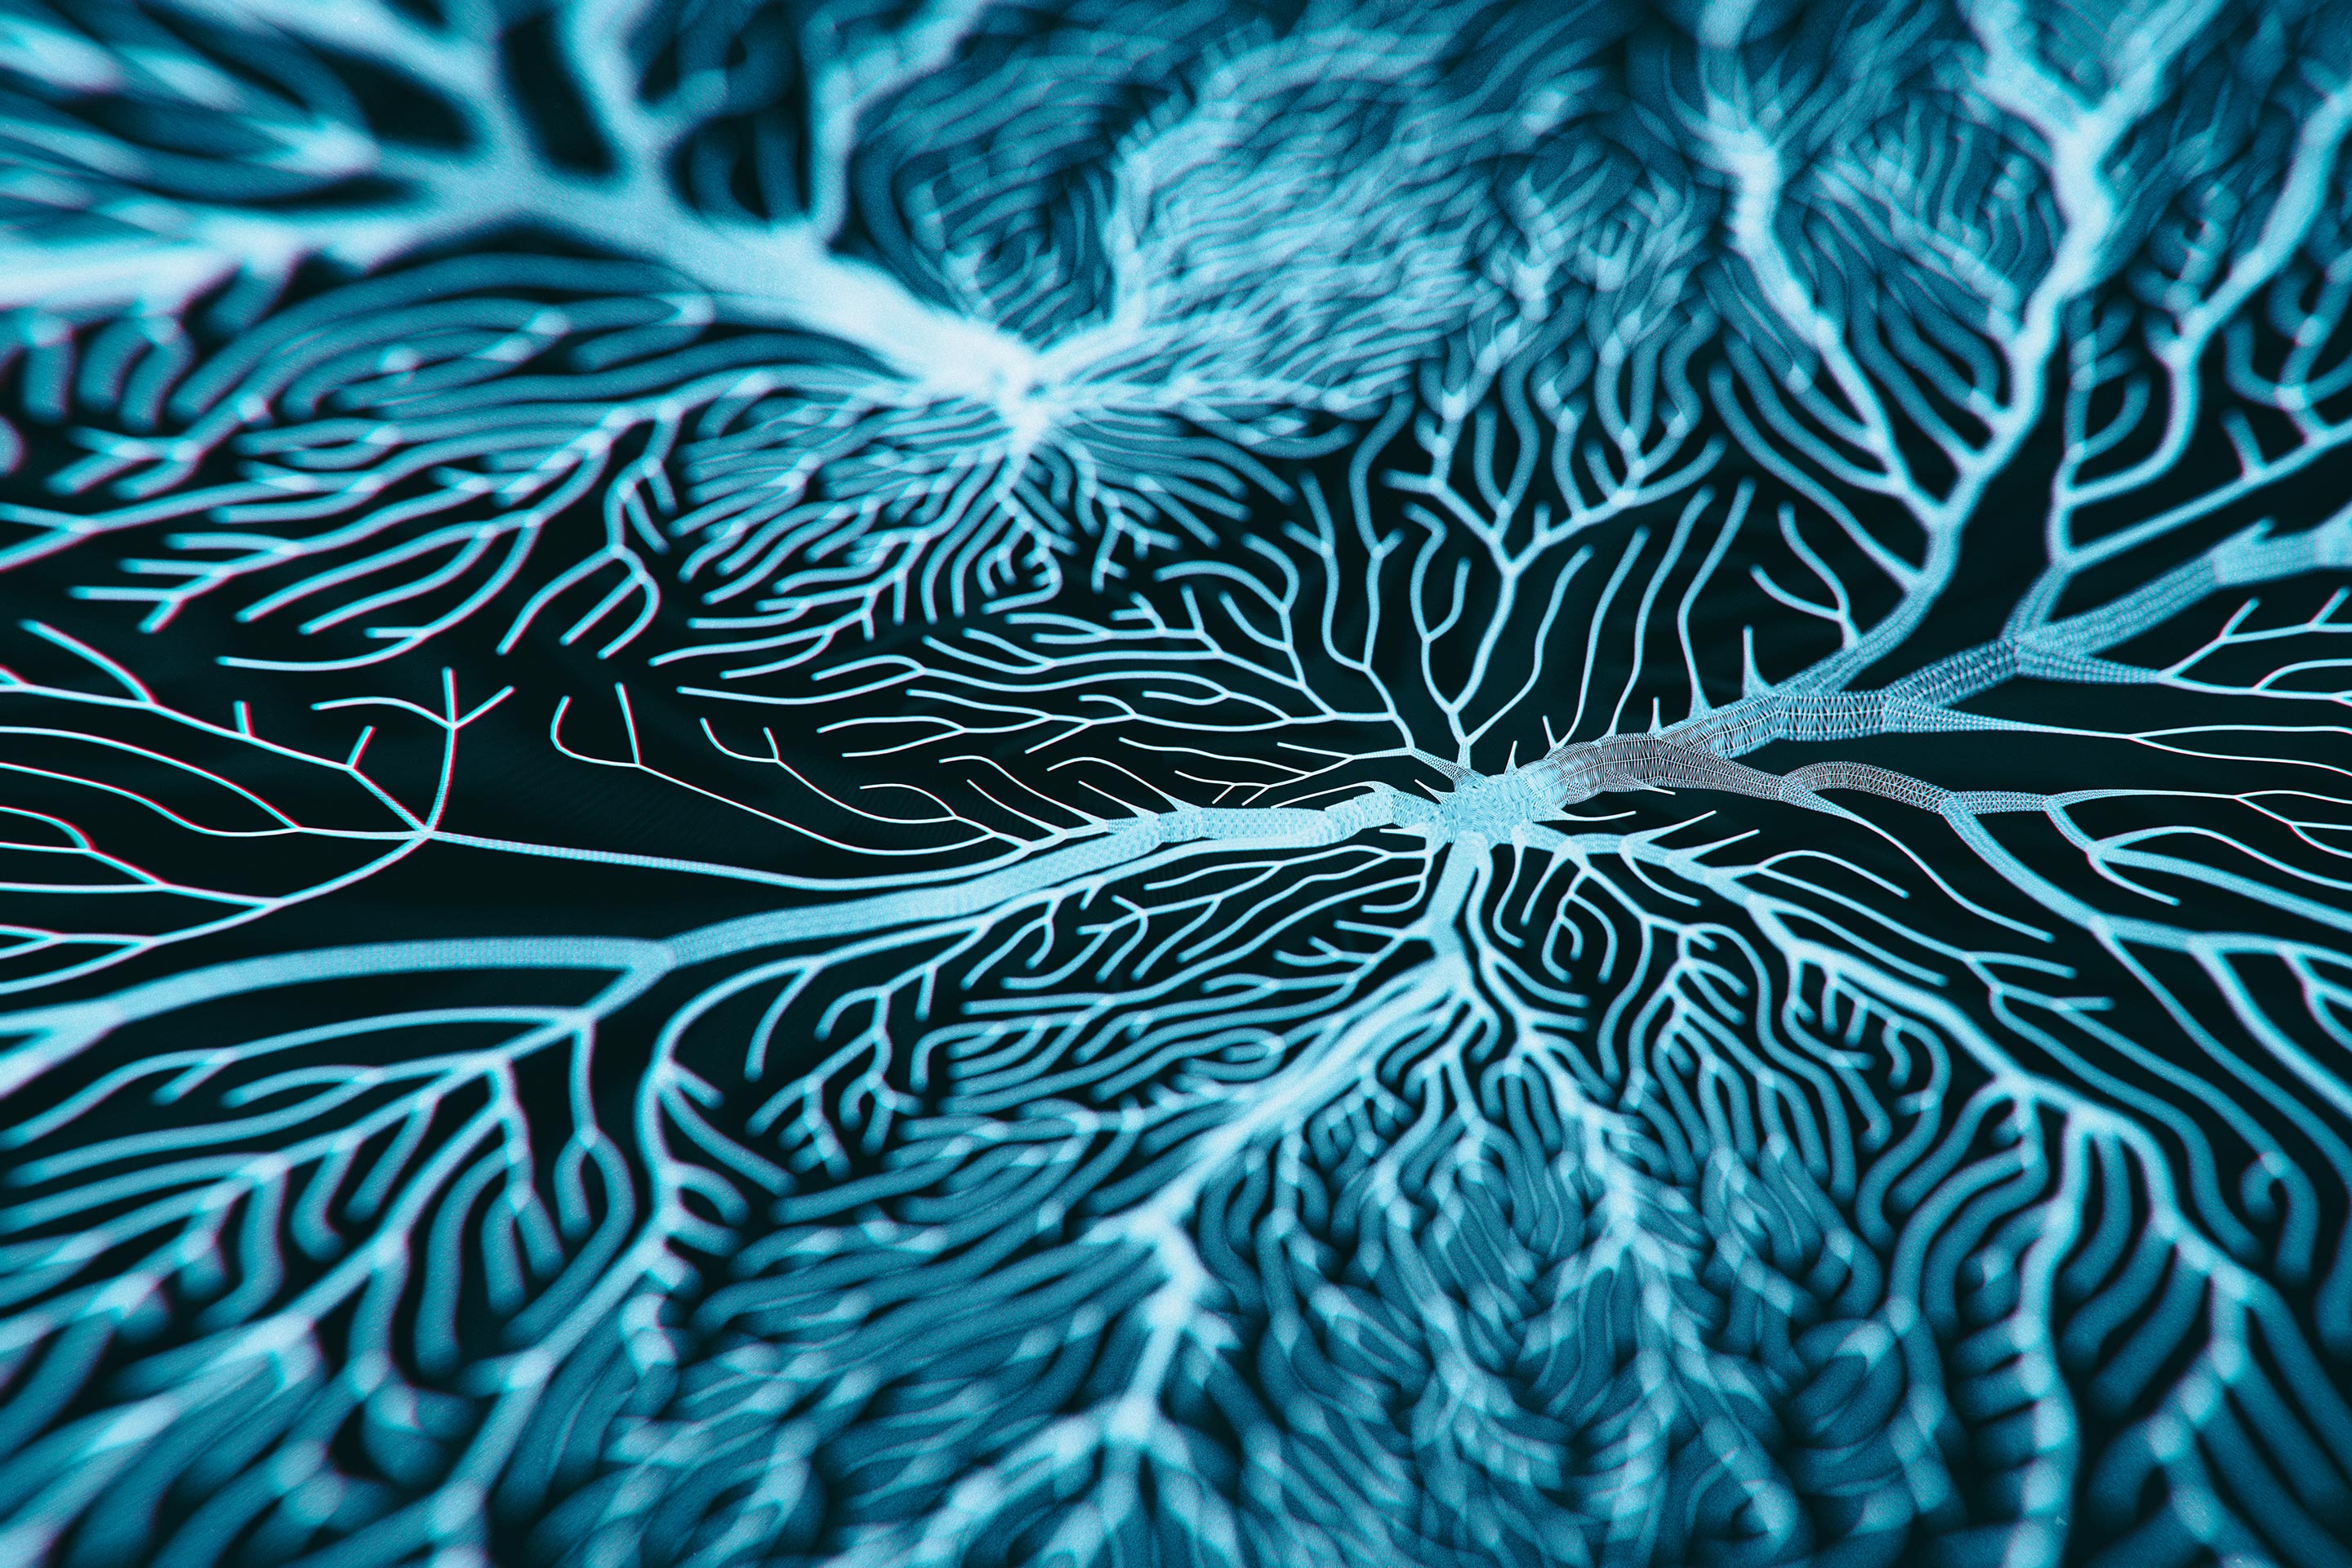 Blue branches reach and connect together like neurons representing intelligence